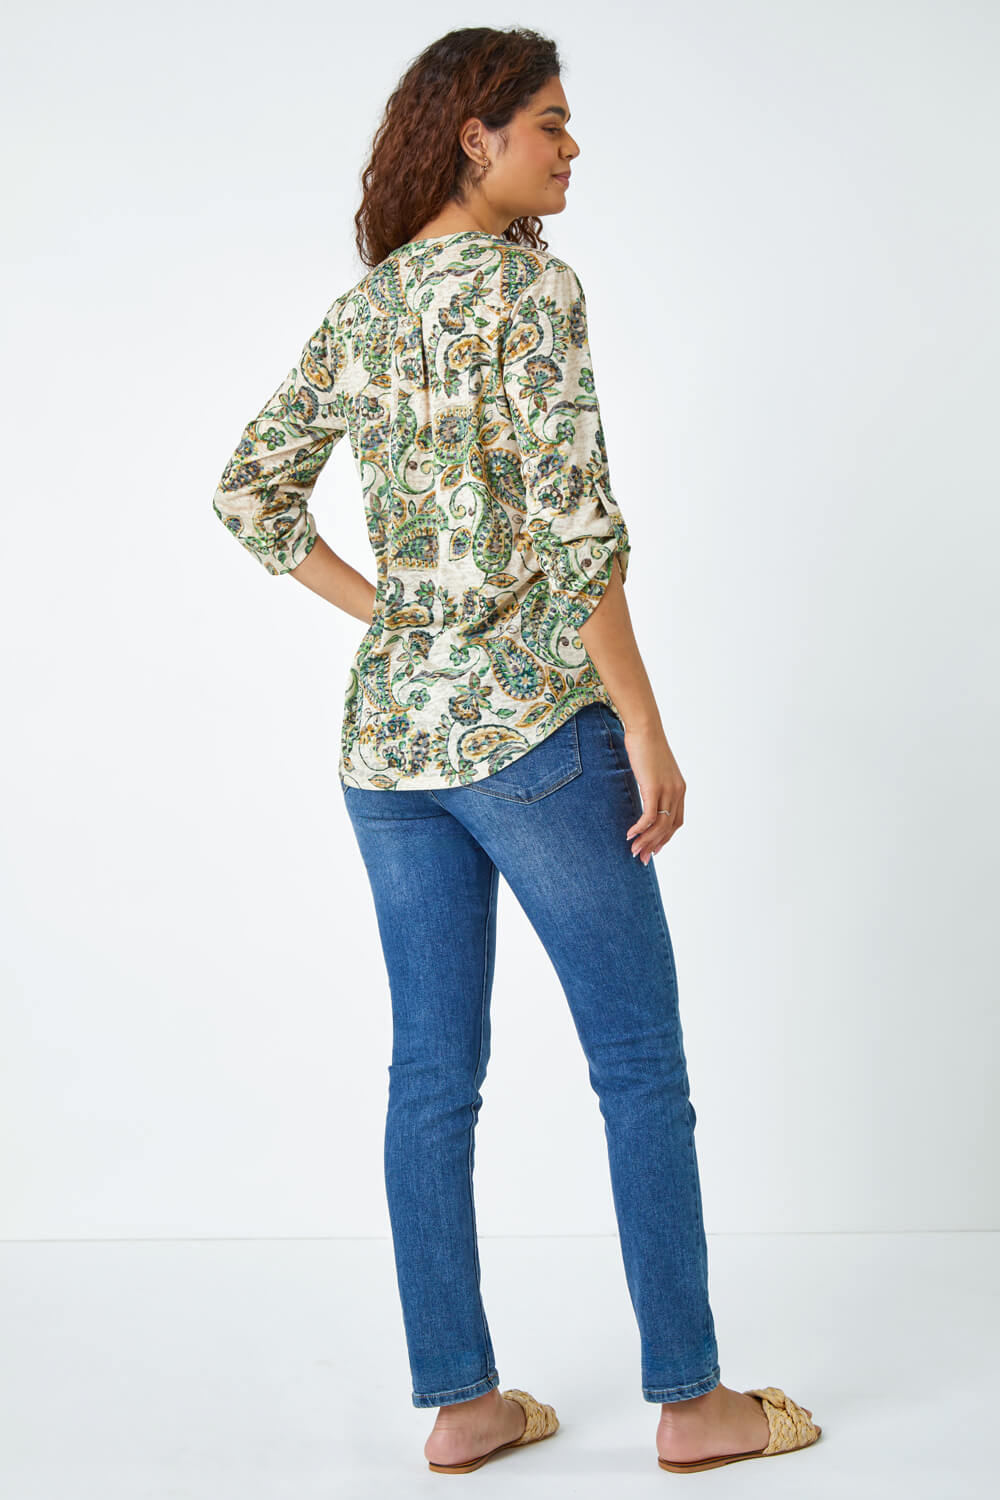 Green Paisley Stretch Jersey Top, Image 3 of 5